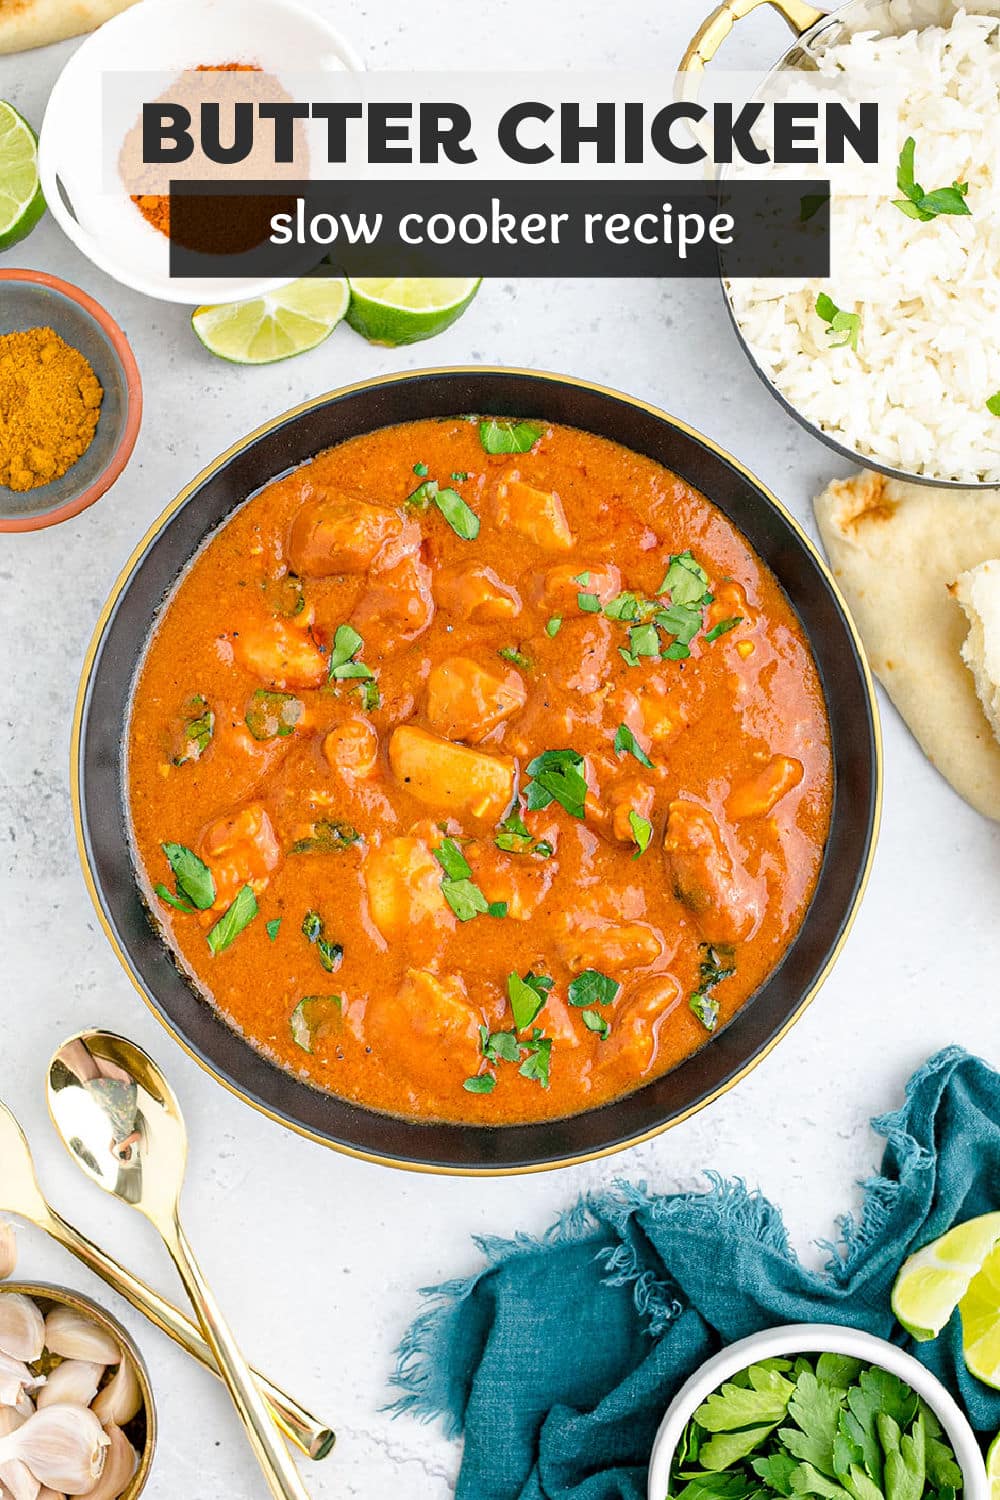 Slow Cooker Butter Chicken is a delicious dairy-free meal that is rich and creamy without adding lots of butter! This healthy Indian-inspired dish is easy to make and perfect for a weeknight dinner in the crockpot. It’s a meal that everyone in your family will love. | www.persnicketyplates.com